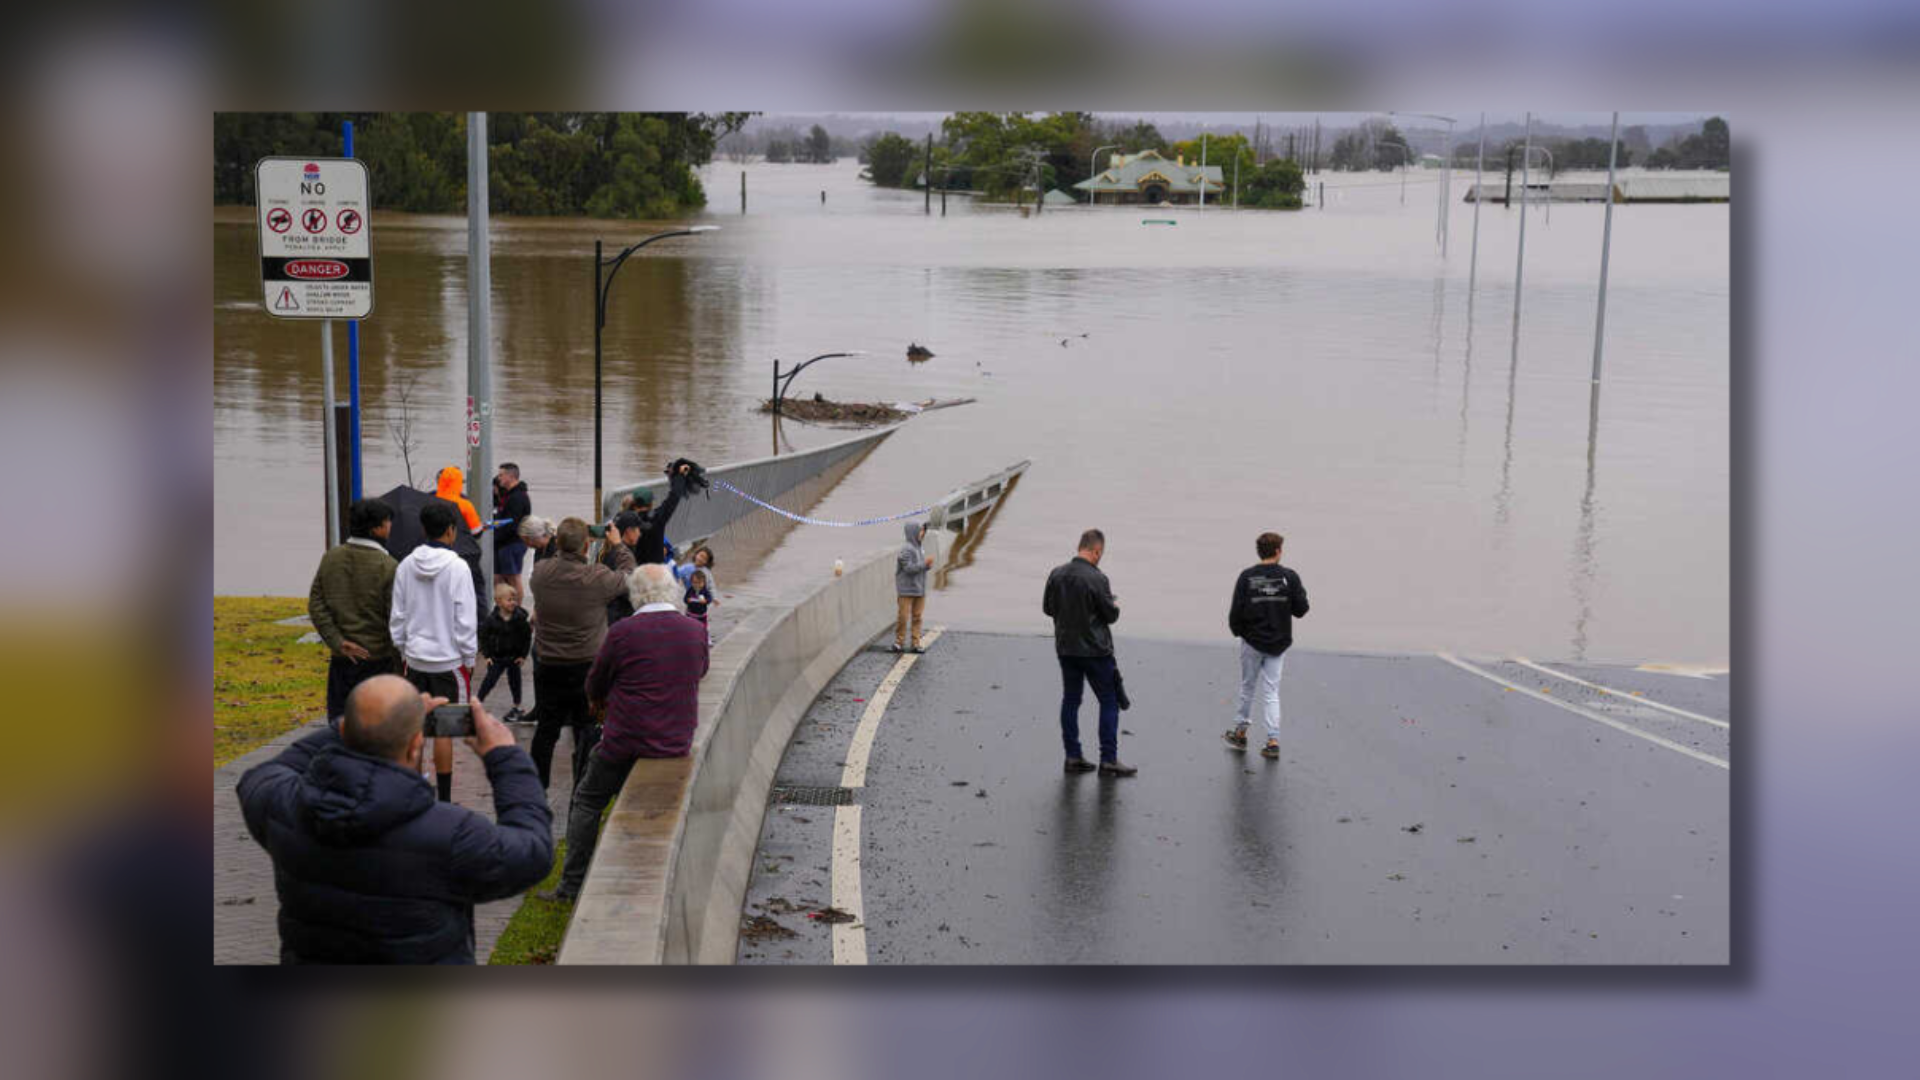 Sydney Flood Alert: Anticipating Continued Downpour As Primary Dam Overflows